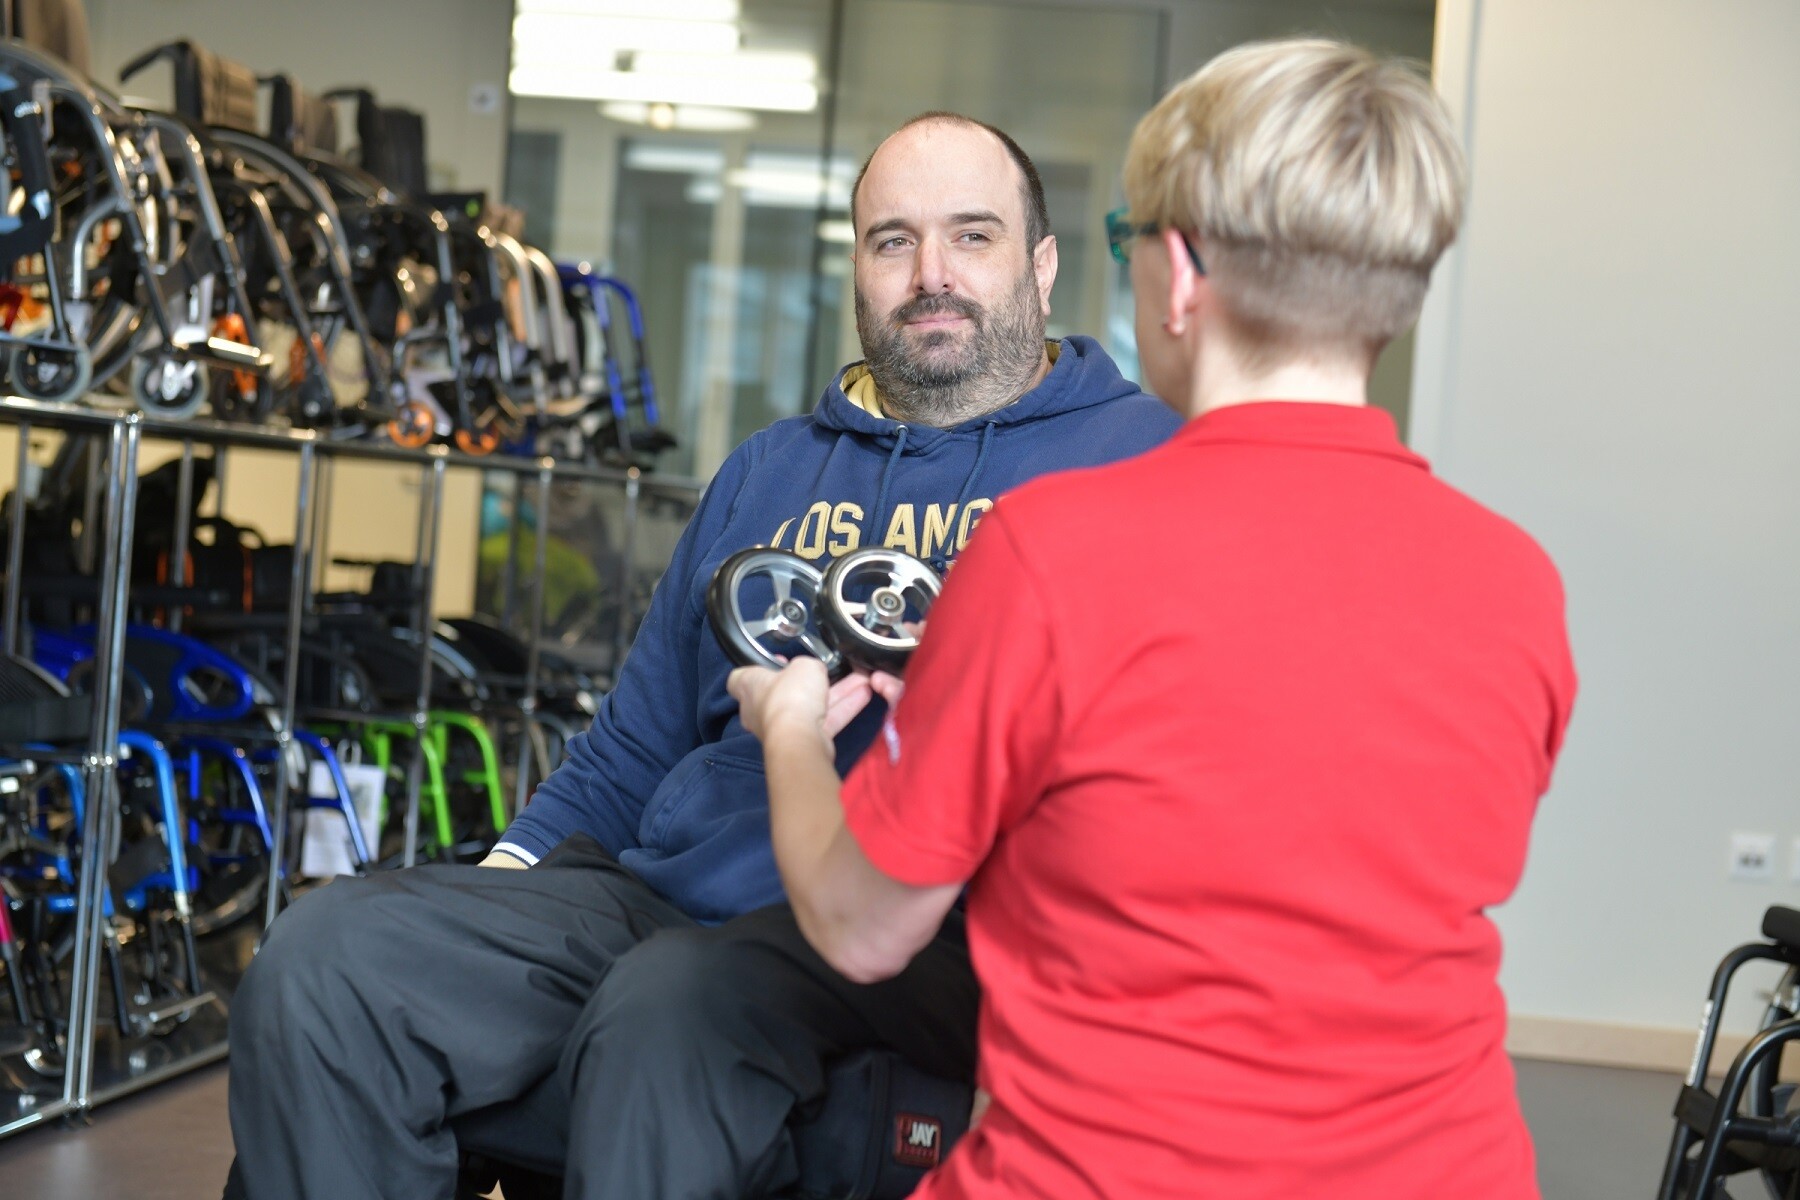 An Orthotec employee gives advice to a wheelchair user and shows him two front wheels.